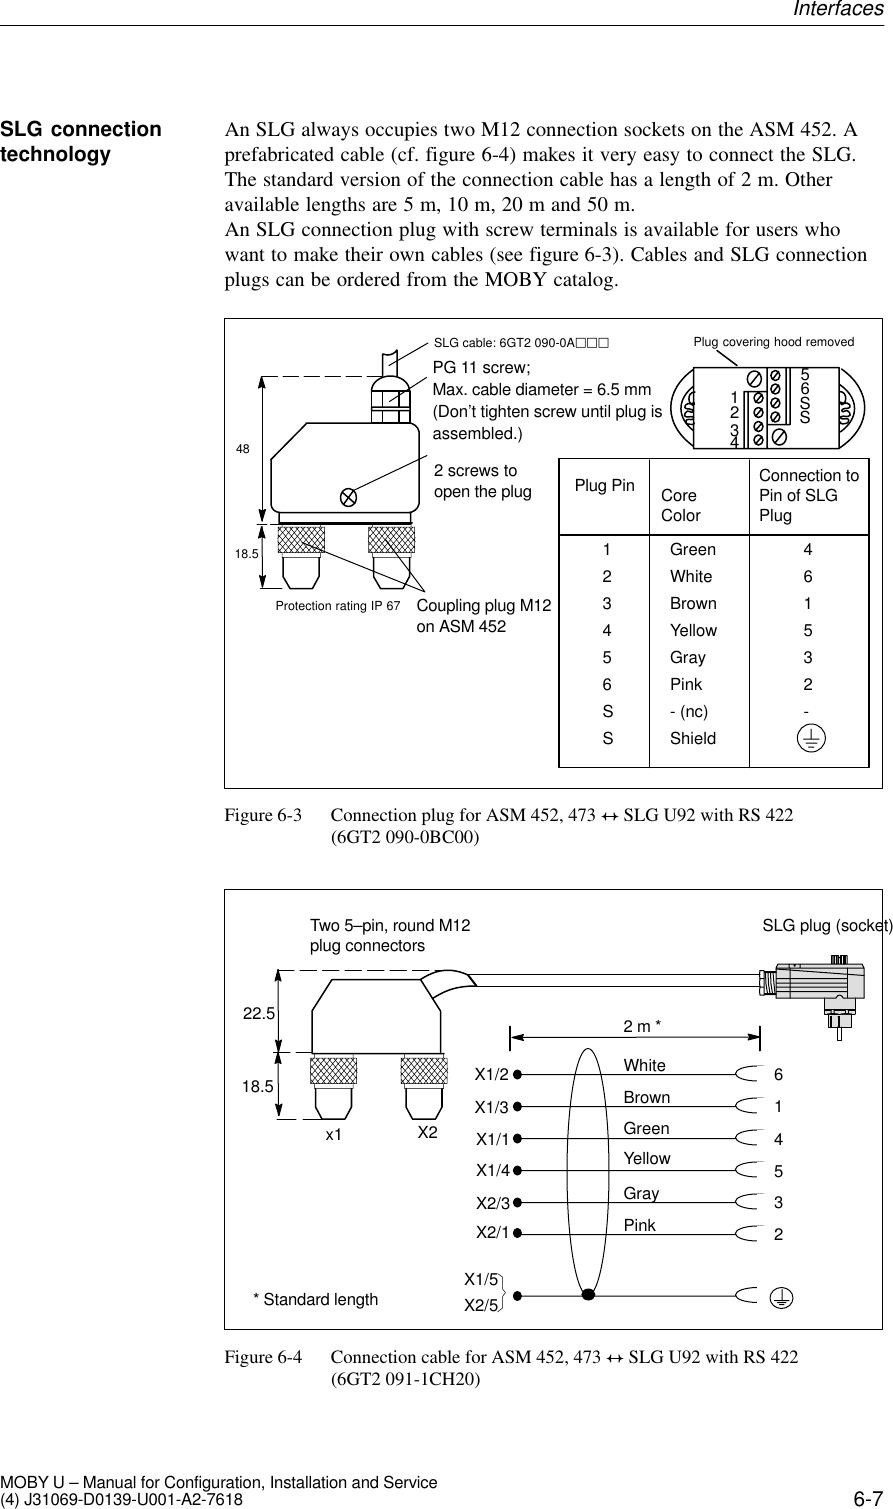 6-7MOBY U – Manual for Configuration, Installation and Service(4) J31069-D0139-U001-A2-7618An SLG always occupies two M12 connection sockets on the ASM 452. Aprefabricated cable (cf. figure 6-4) makes it very easy to connect the SLG.The standard version of the connection cable has a length of 2 m. Otheravailable lengths are 5 m, 10 m, 20 m and 50 m.An SLG connection plug with screw terminals is available for users whowant to make their own cables (see figure 6-3). Cables and SLG connectionplugs can be ordered from the MOBY catalog.SLG cable: 6GT2 090-0AjjjPG 11 screw; Max. cable diameter = 6.5 mm(Don’t tighten screw until plug isassembled.)2 screws toopen the plugCoupling plug M12on ASM 452123456SSPlug Pin123456SSCoreColorGreenWhiteBrownYellowGrayPink- (nc)ShieldConnection toPin of SLGPlug461532-Plug covering hood removedProtection rating IP 674818.5Figure 6-3 Connection plug for ASM 452, 473 $ SLG U92 with RS 422 (6GT2 090-0BC00)614532Two 5–pin, round M12plug connectorsX1/2X1/3X1/1X1/4X2/3X2/1X1/5X2/5x1 X2WhiteBrownGreenYellowGrayPinkSLG plug (socket)2 m *22.518.5* Standard lengthFigure 6-4 Connection cable for ASM 452, 473 $ SLG U92 with RS 422 (6GT2 091-1CH20)SLG connectiontechnologyInterfaces